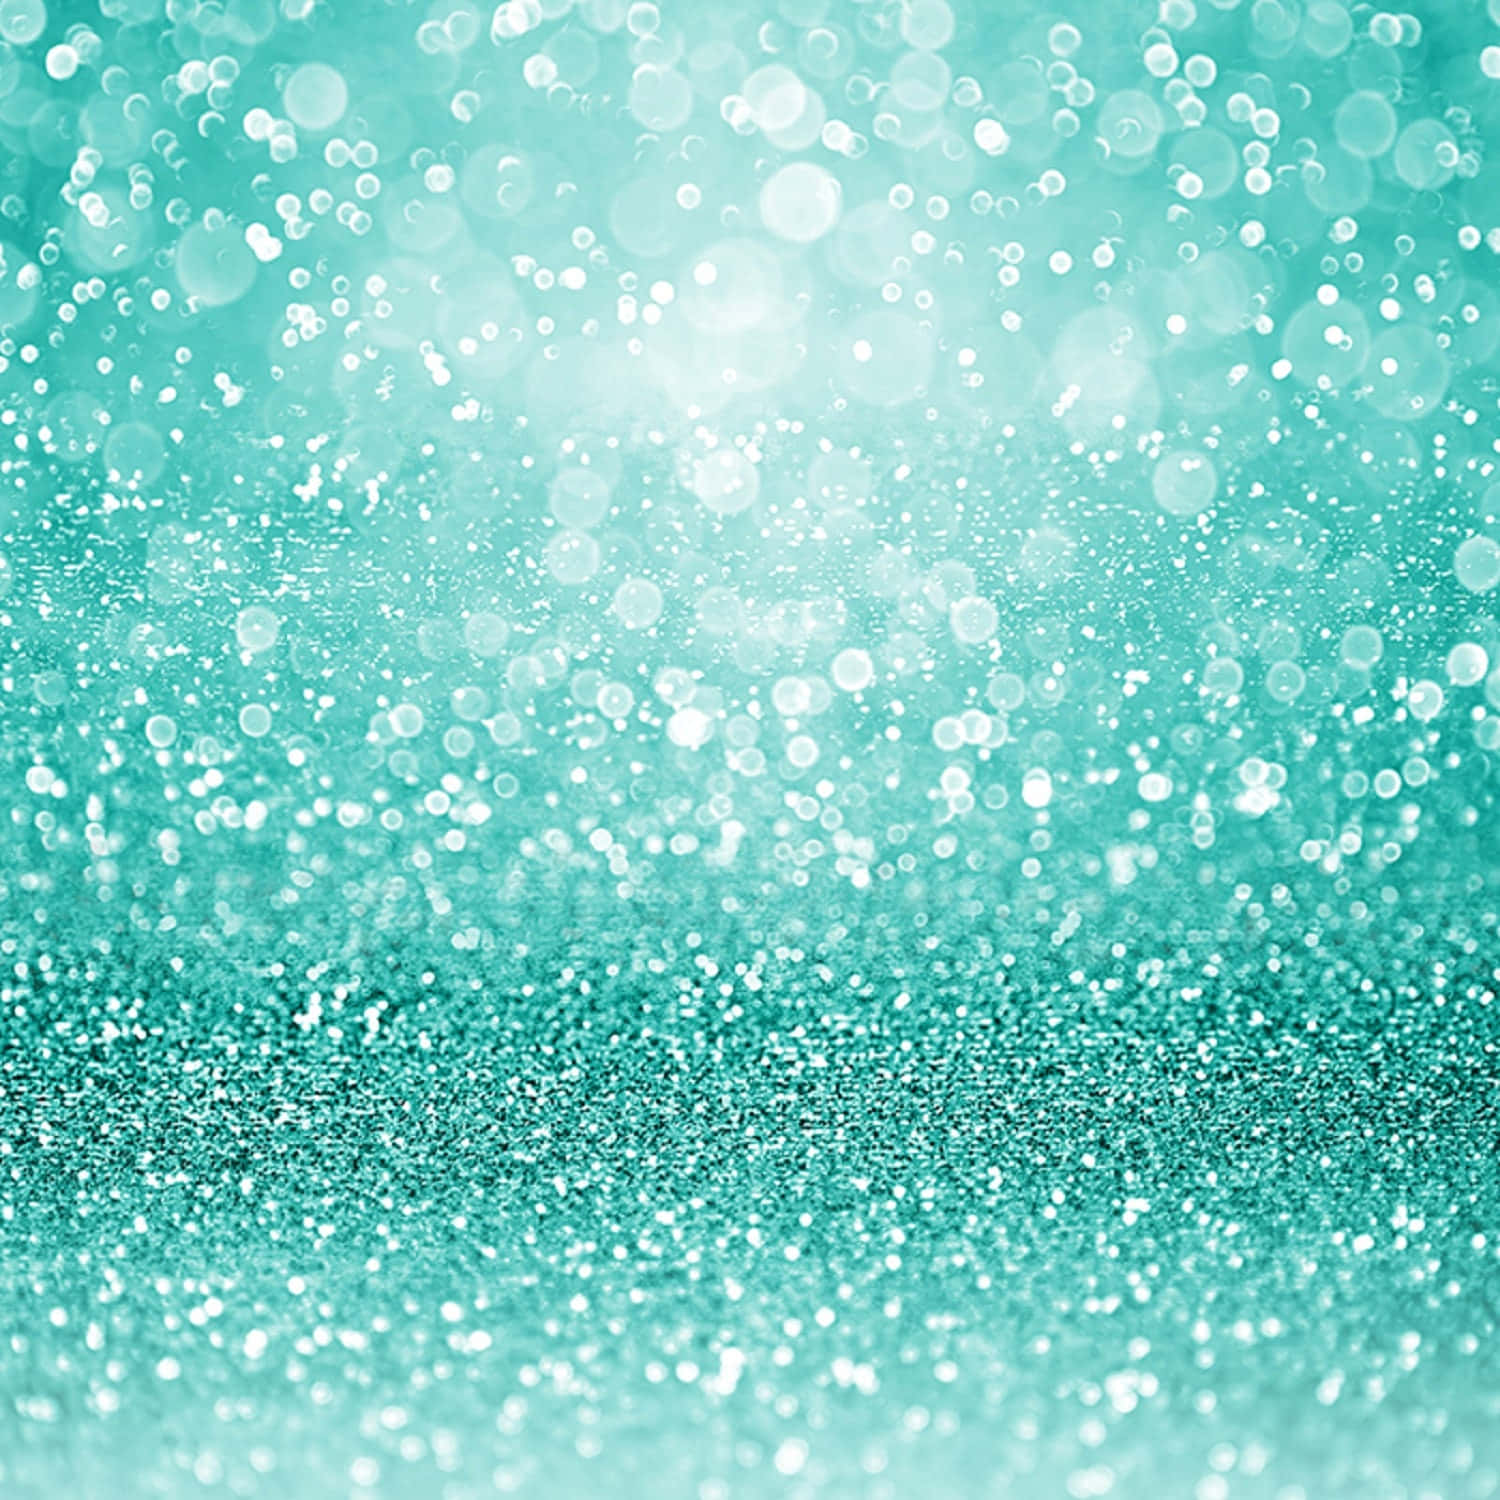 A Turquoise Glitter Background With White Bokeh